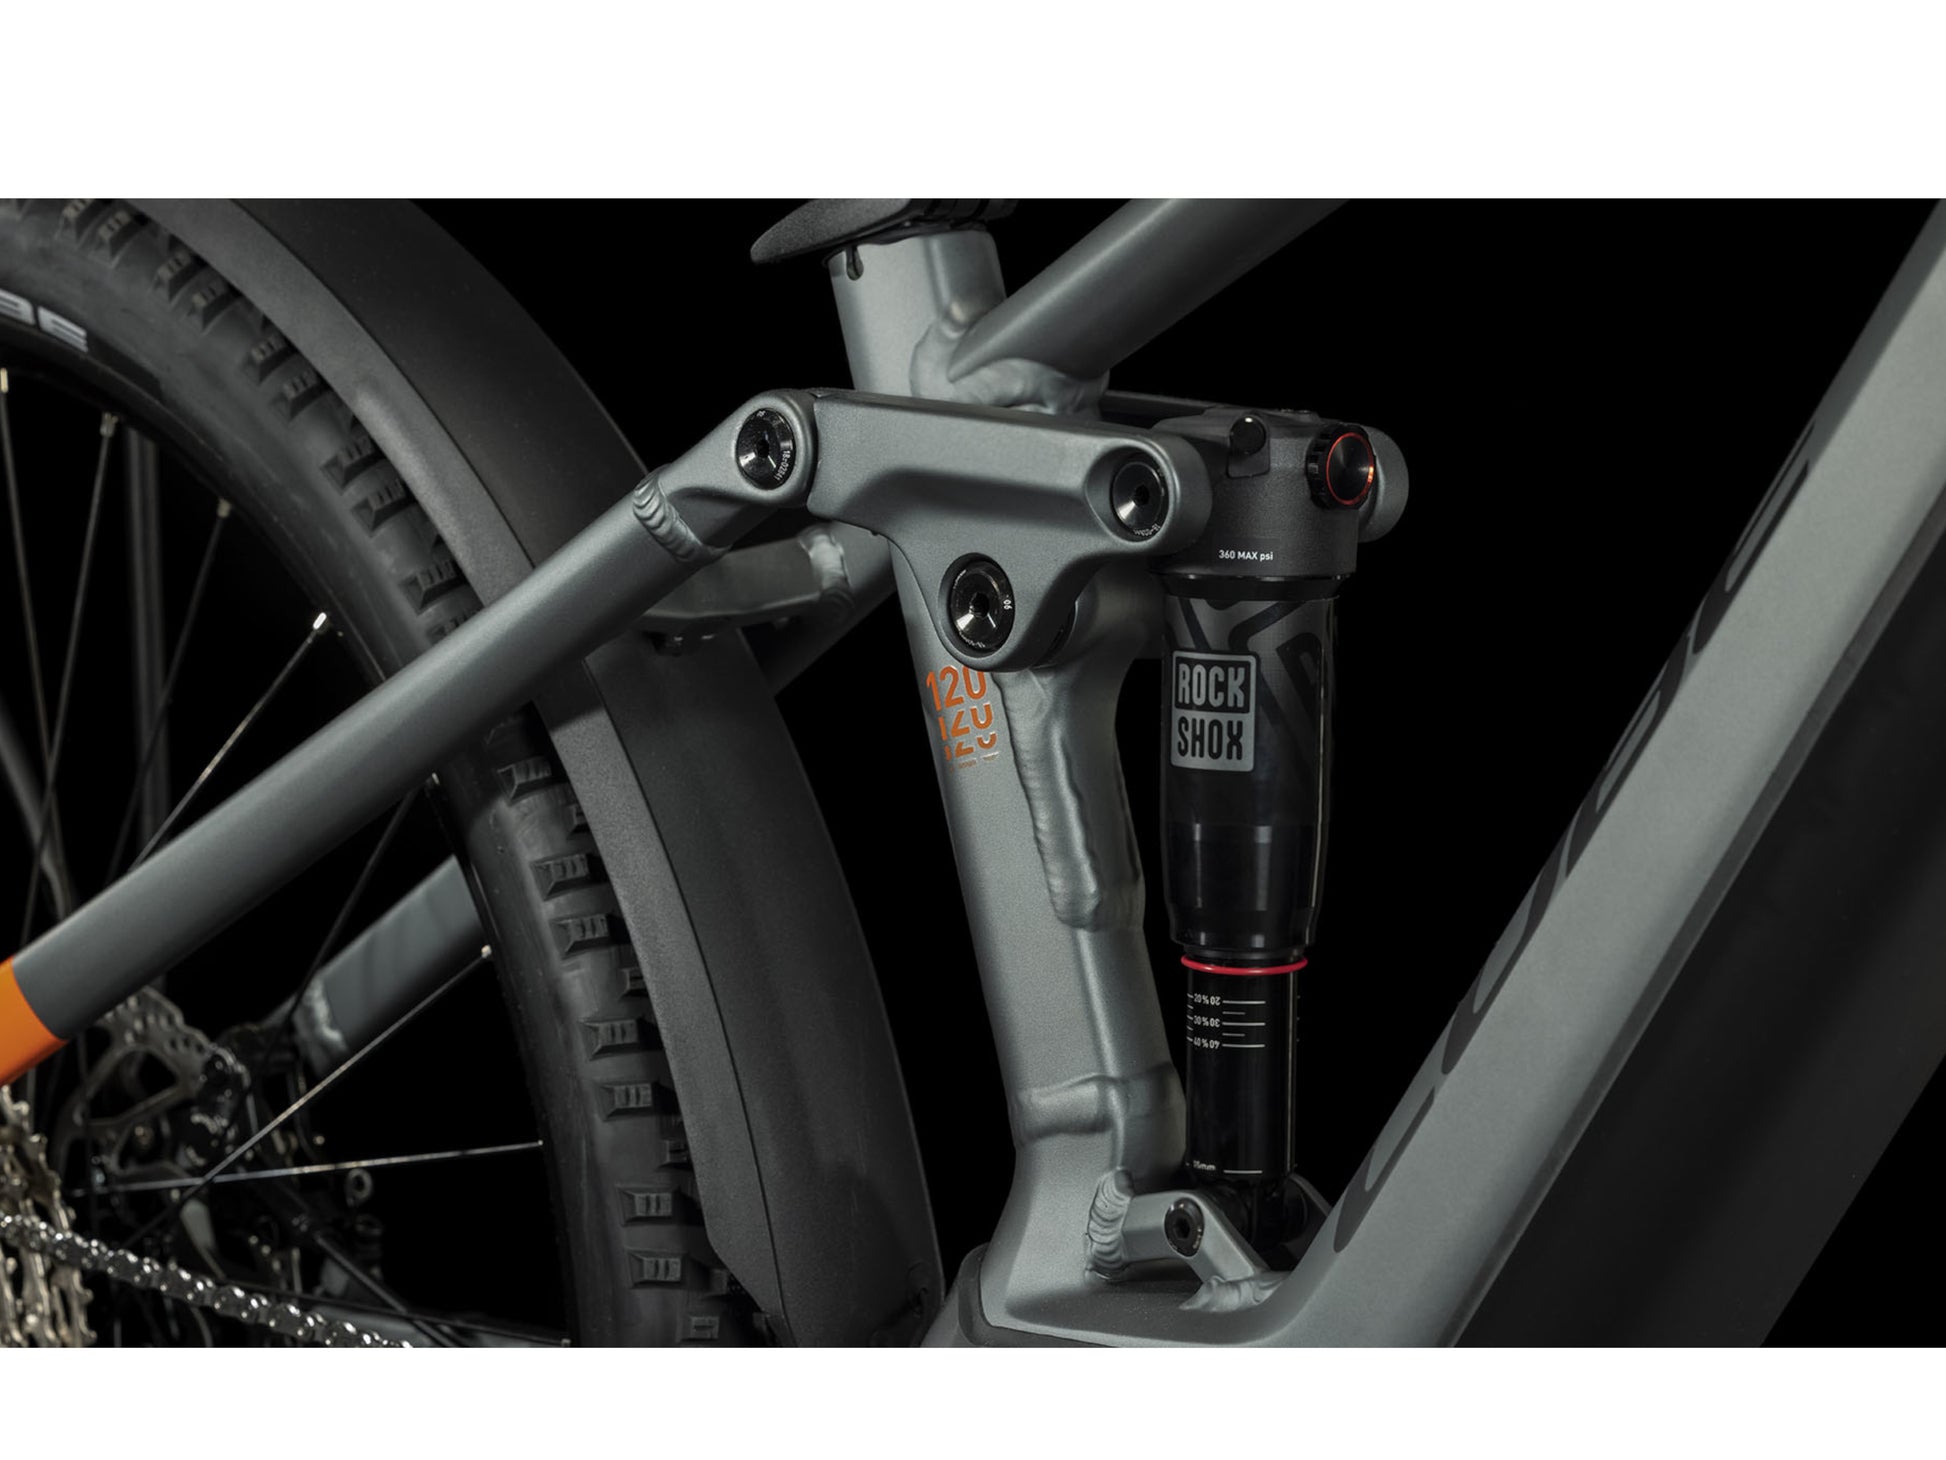 Cube Stereo Hybrid 120 PRO 625 Allroad eMTB full Suspension closeup RockShox Deluxe Select rear shock triangle